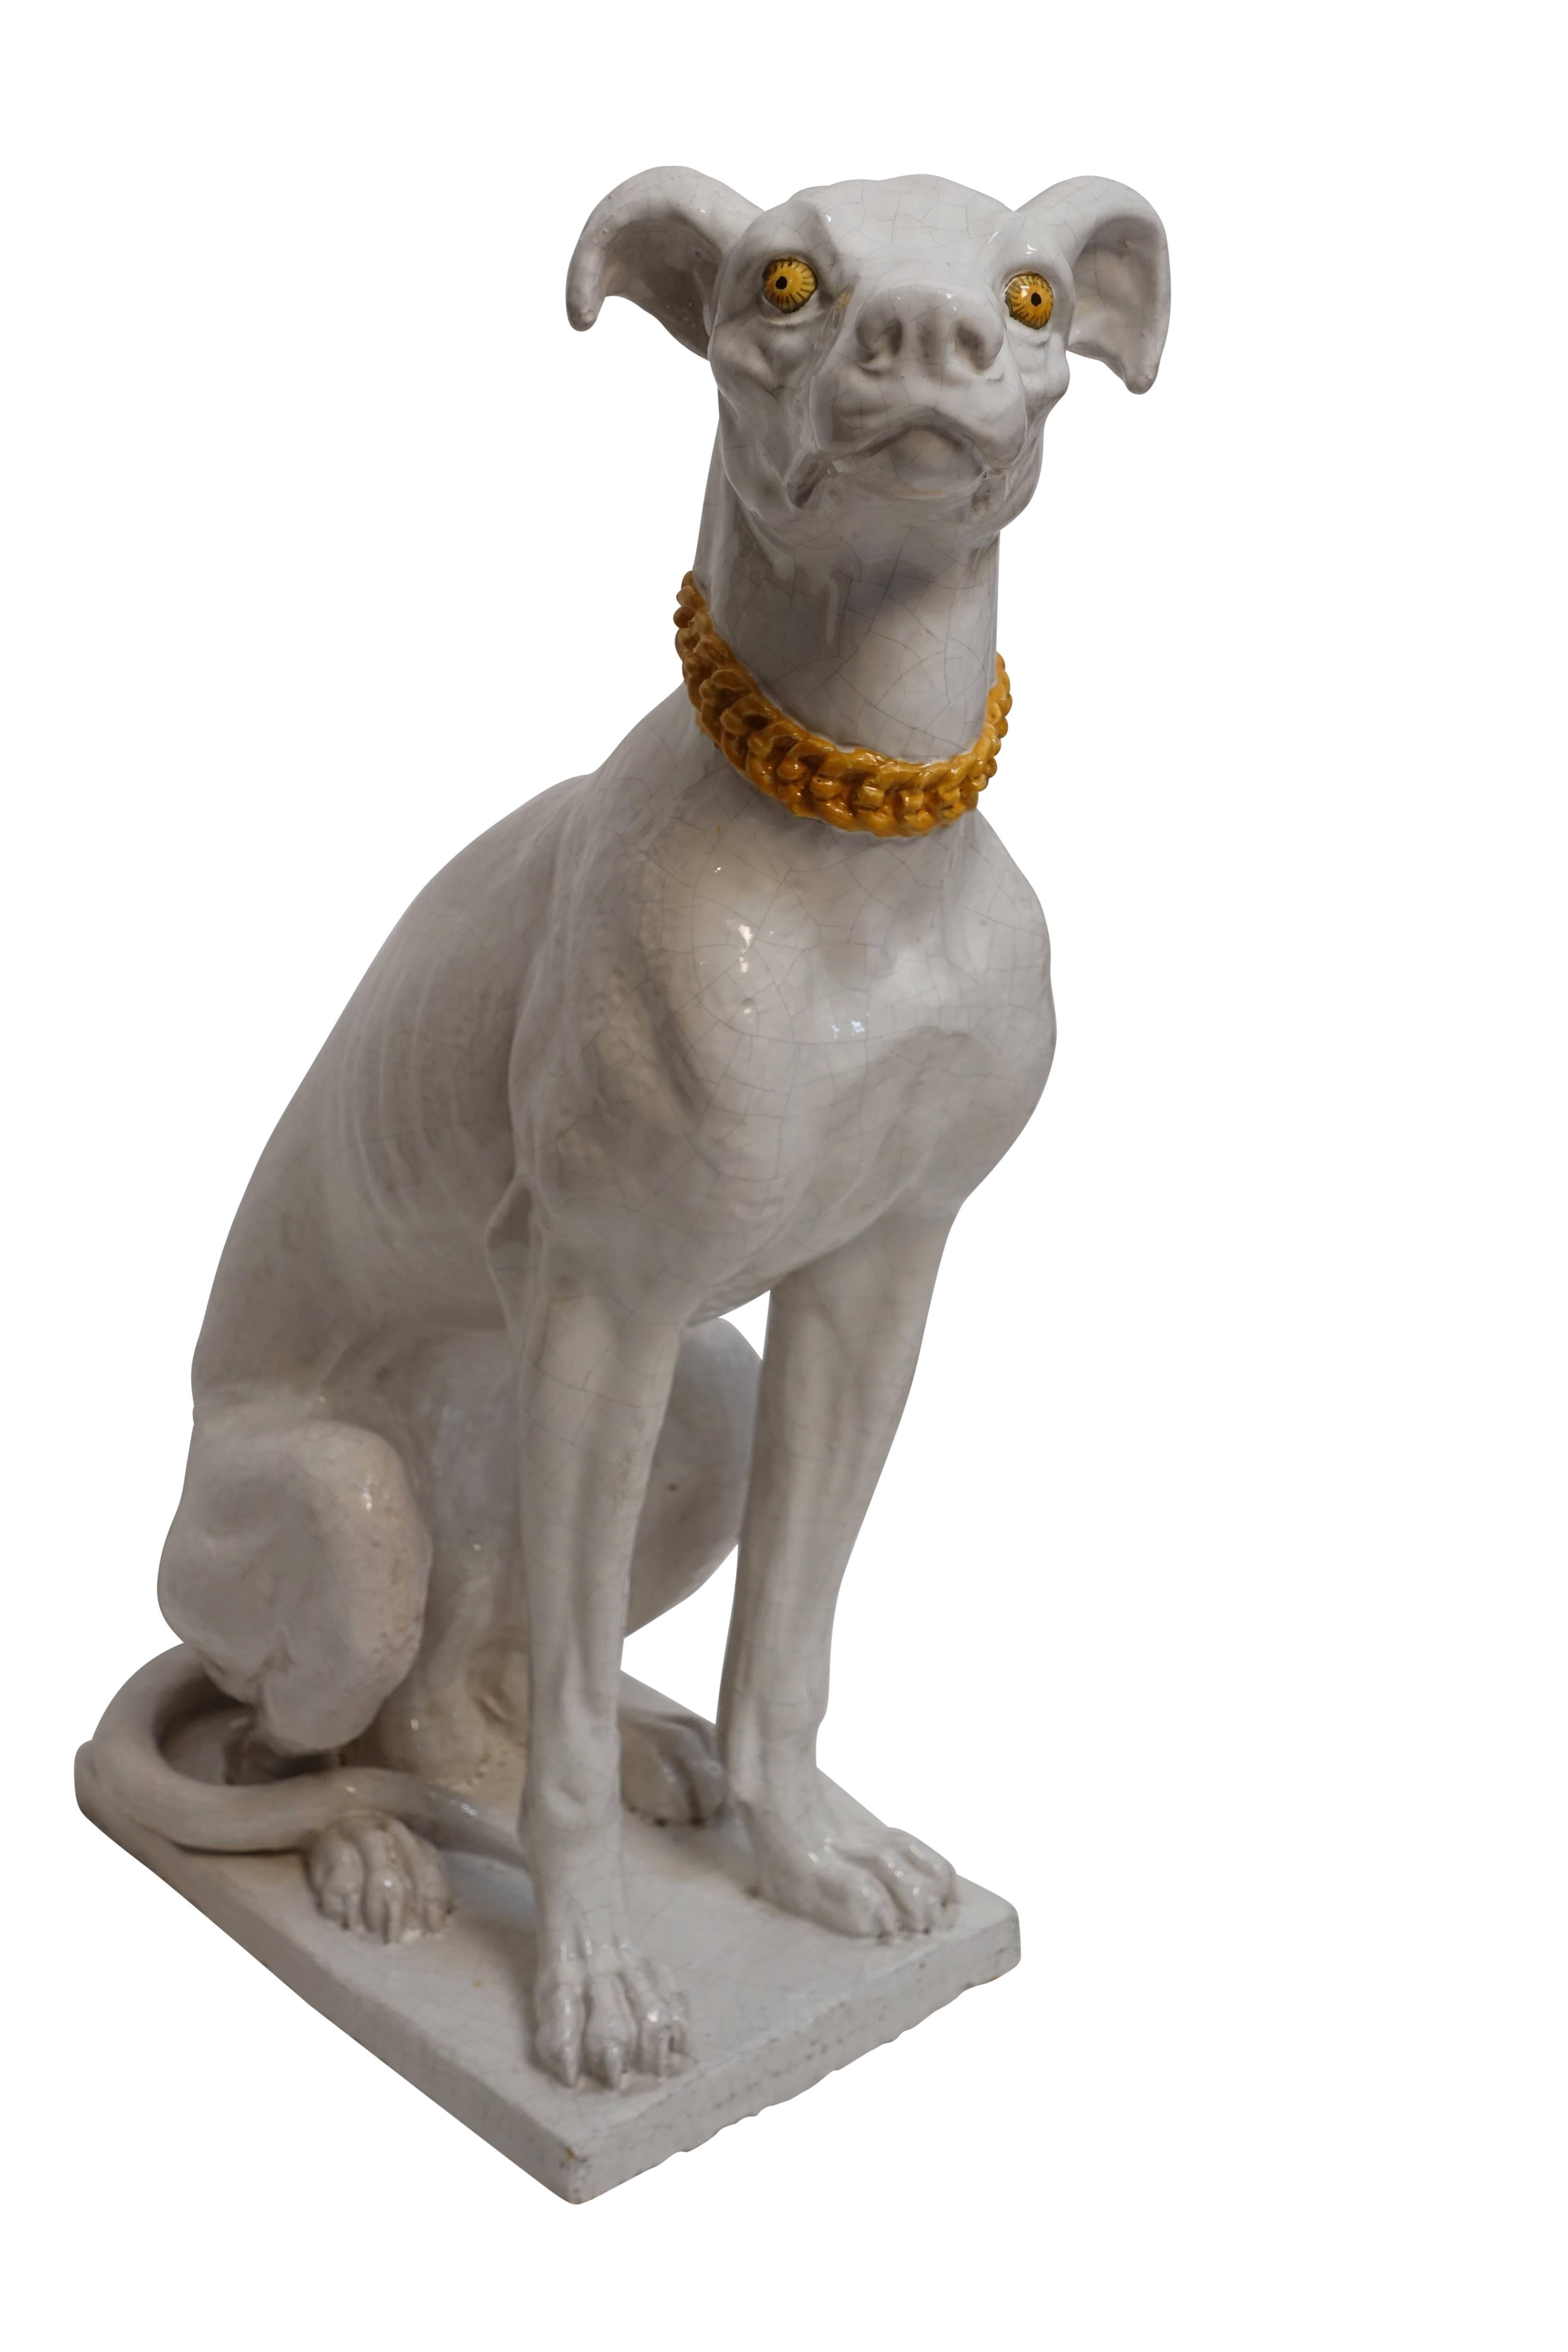 Large faience pottery greyhound or whippet dog statue, white glaze with yellow accents. Italy, 1950s-1960s.